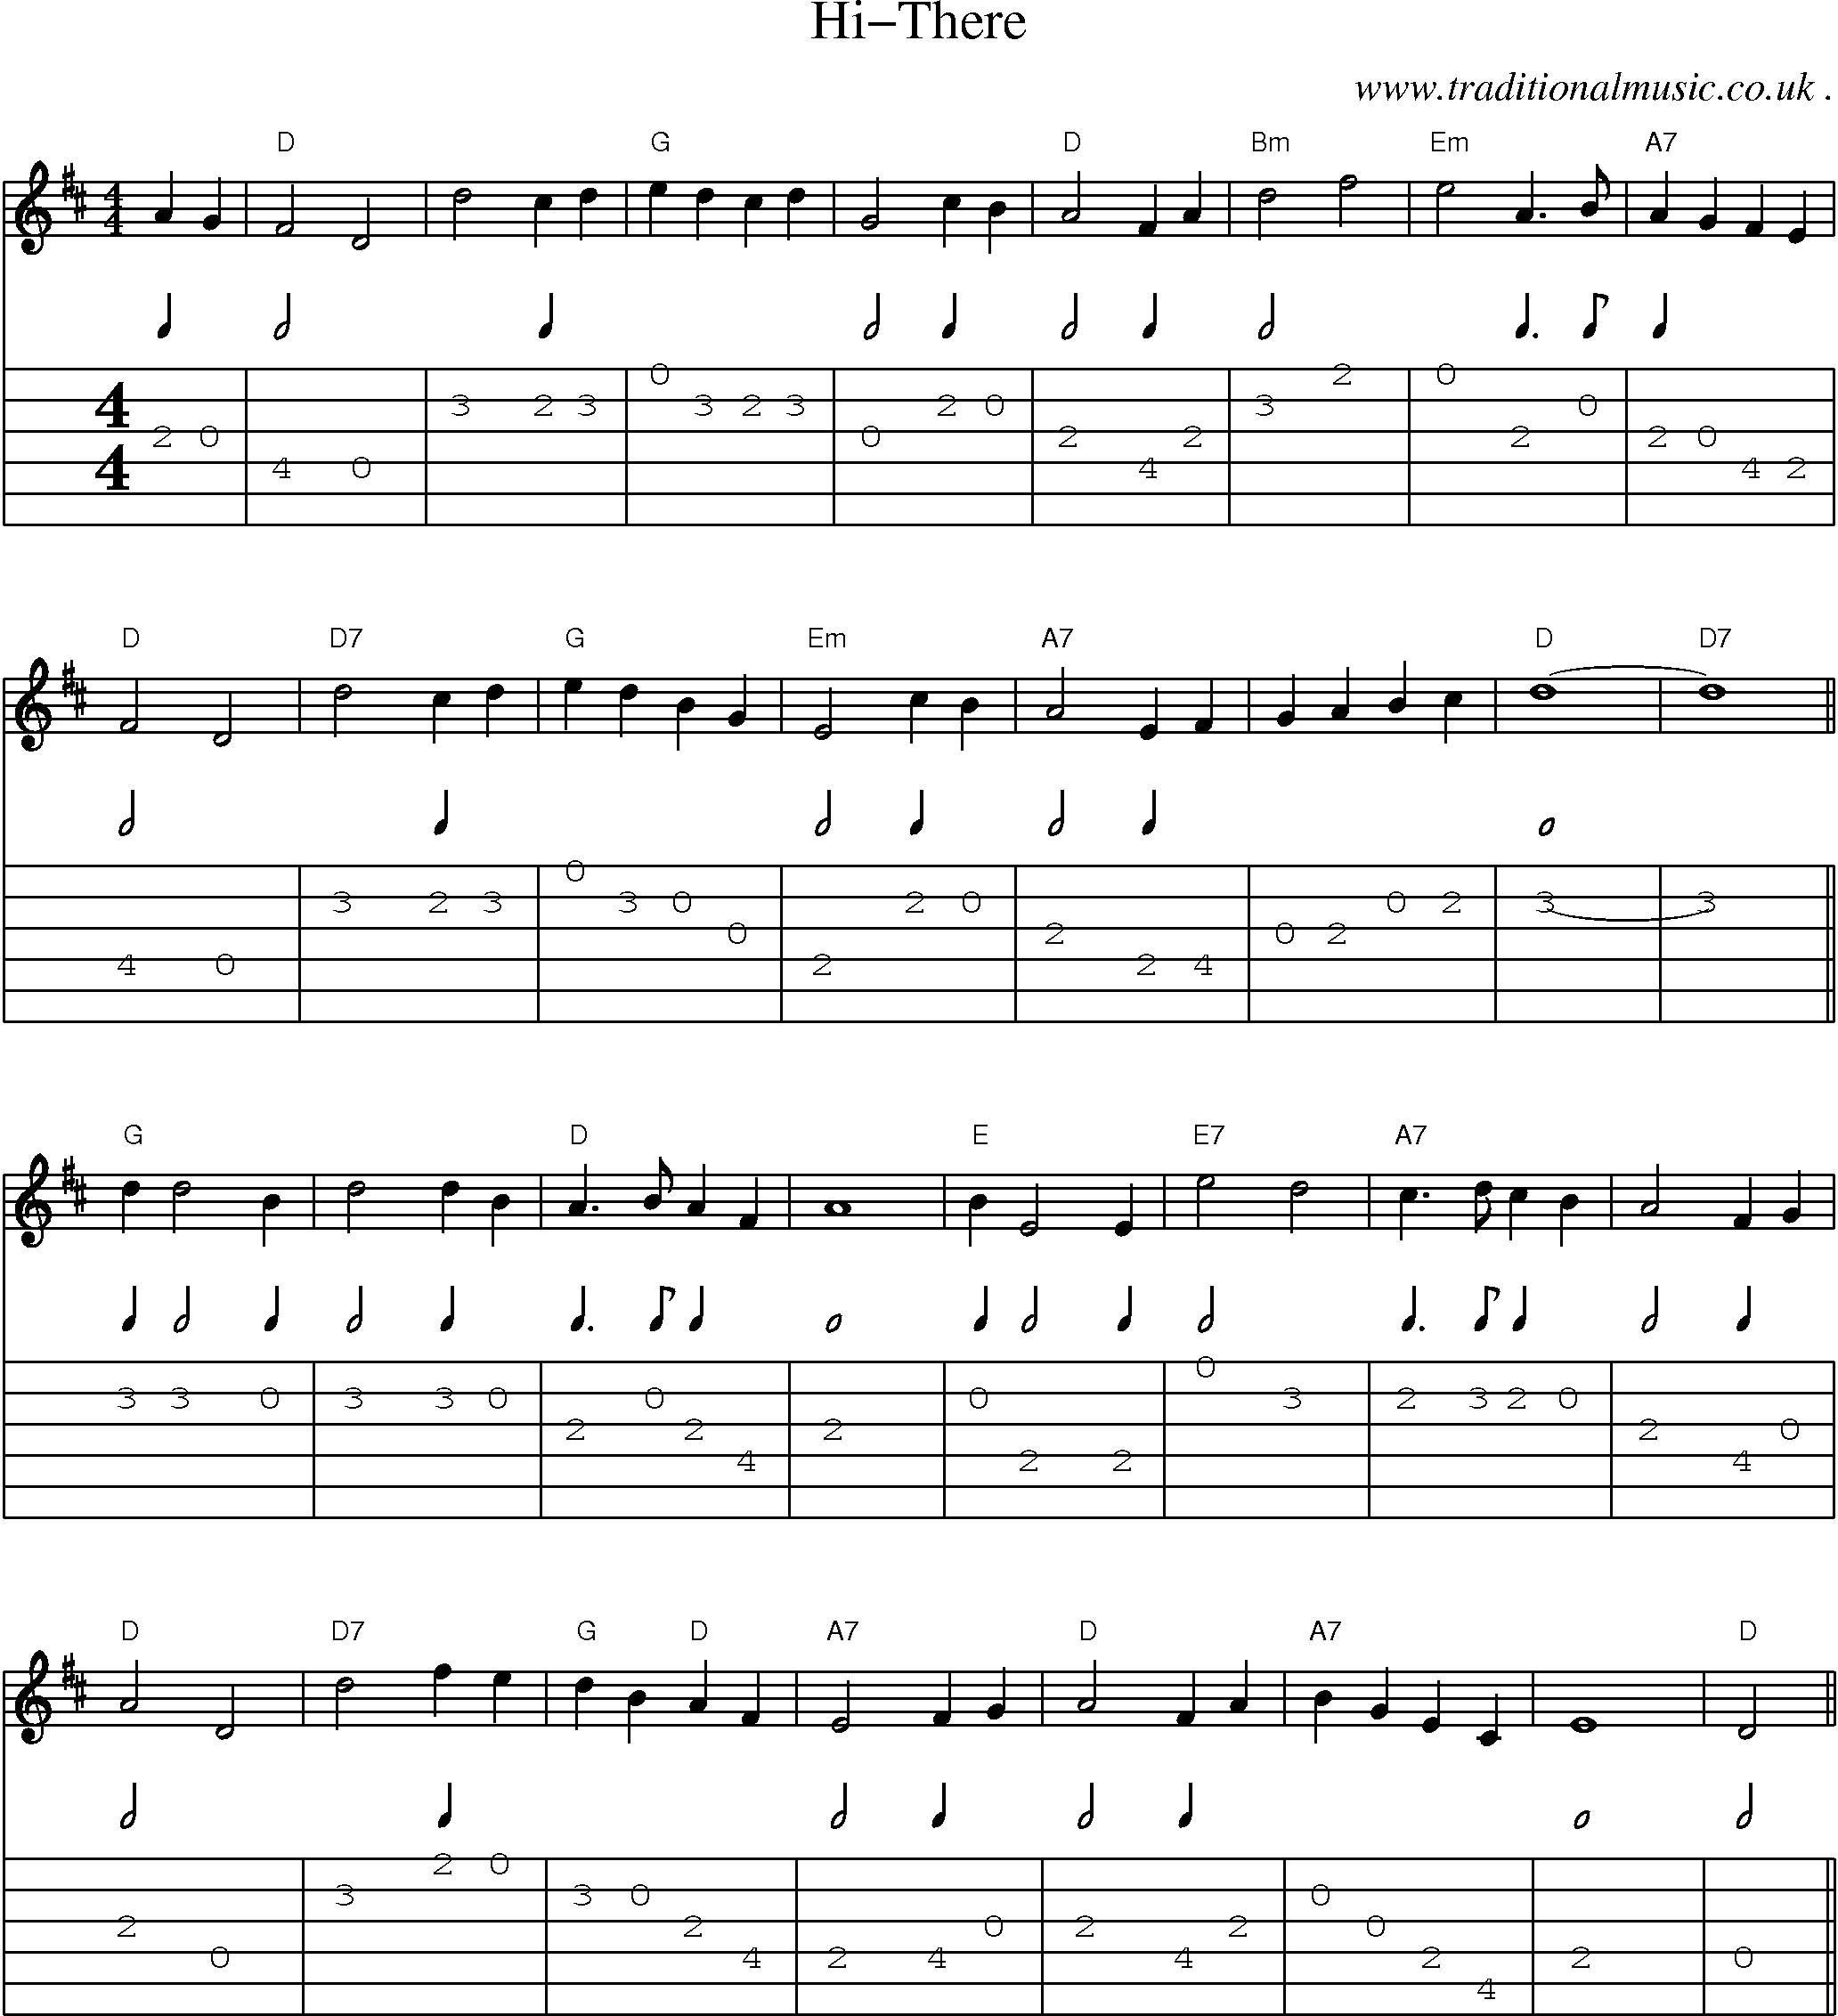 Sheet-Music and Guitar Tabs for Hi-there